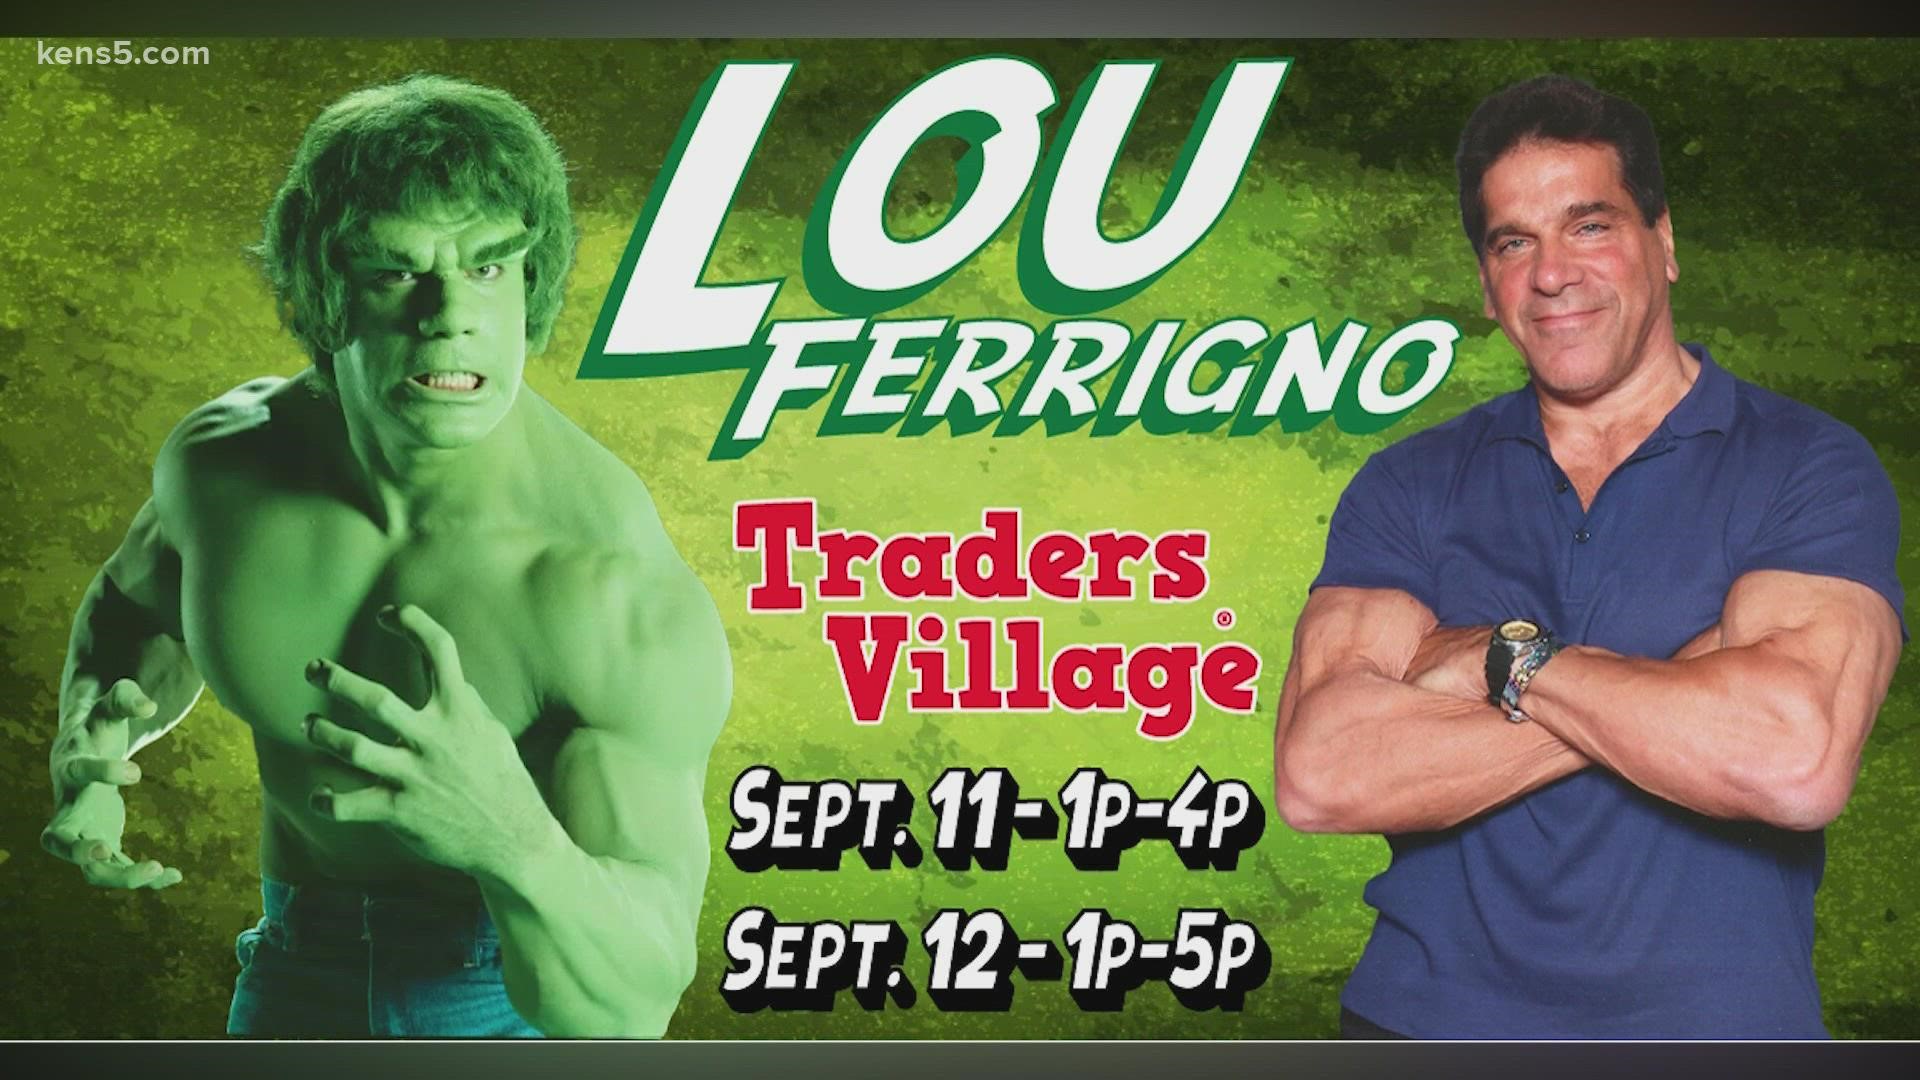 Lou Ferrigno is meeting with fans and supporting a good cause.